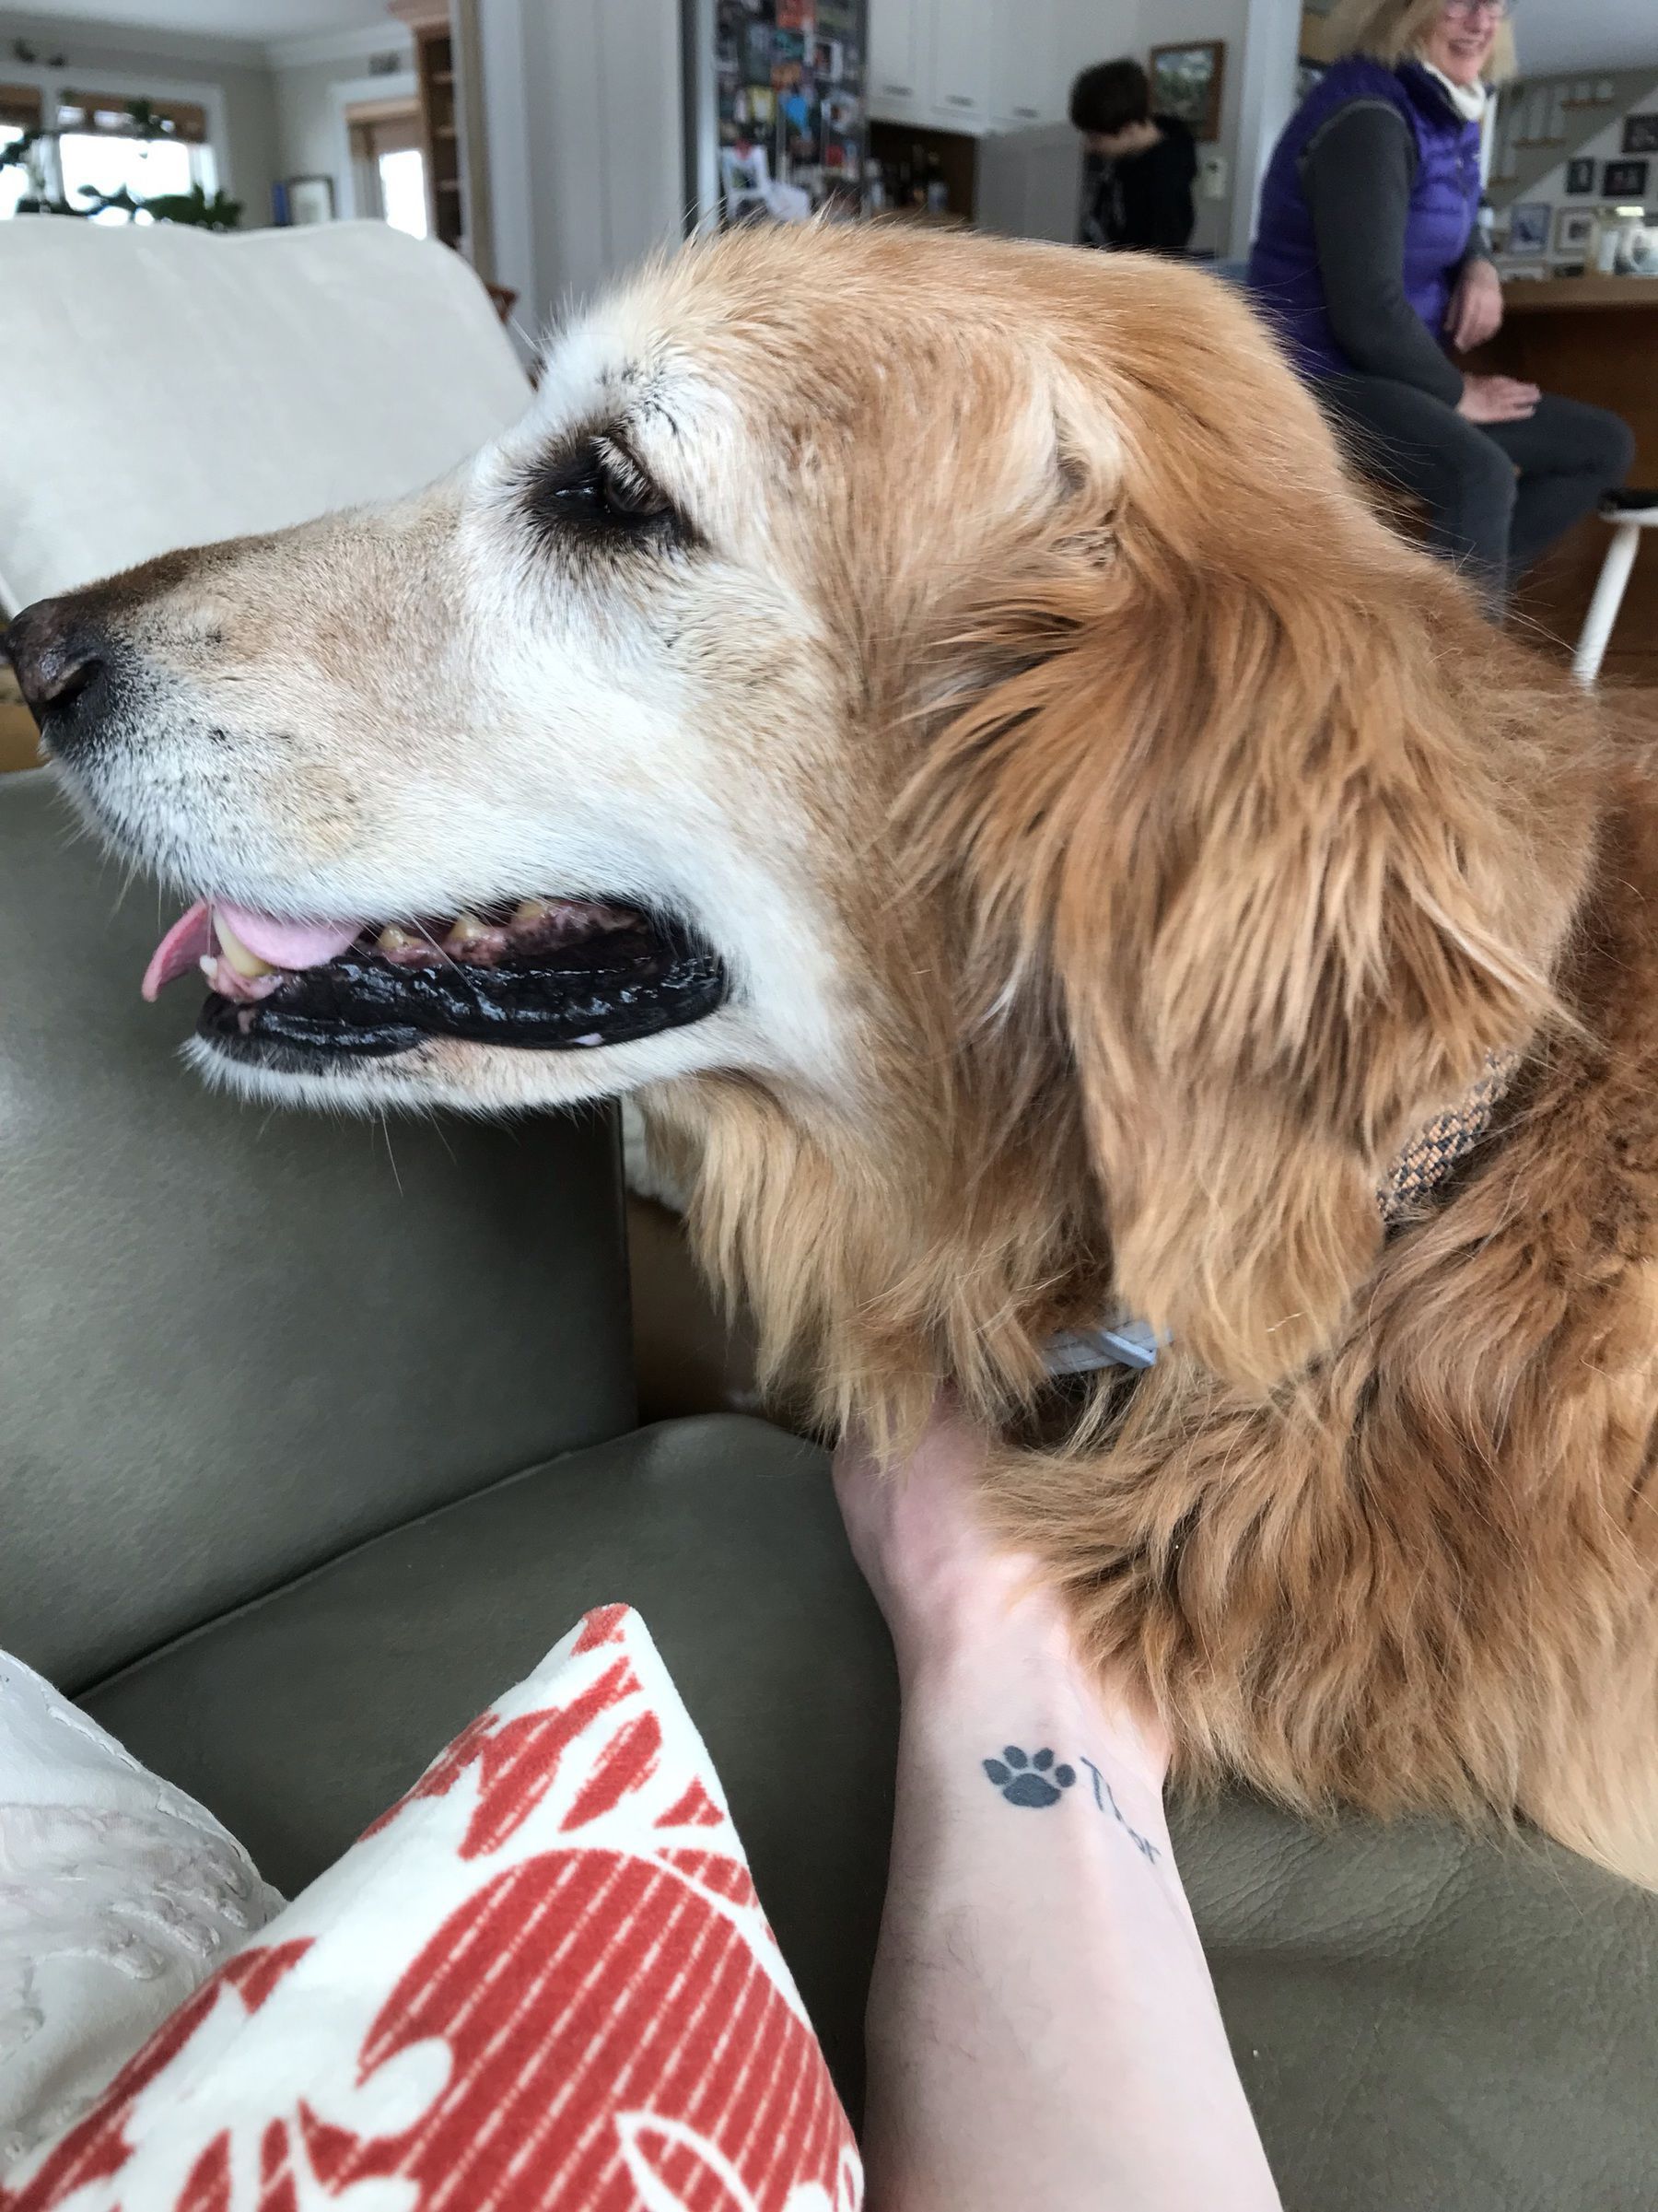 another old golden retriever with her head resting on my hand as I give her chin scratches